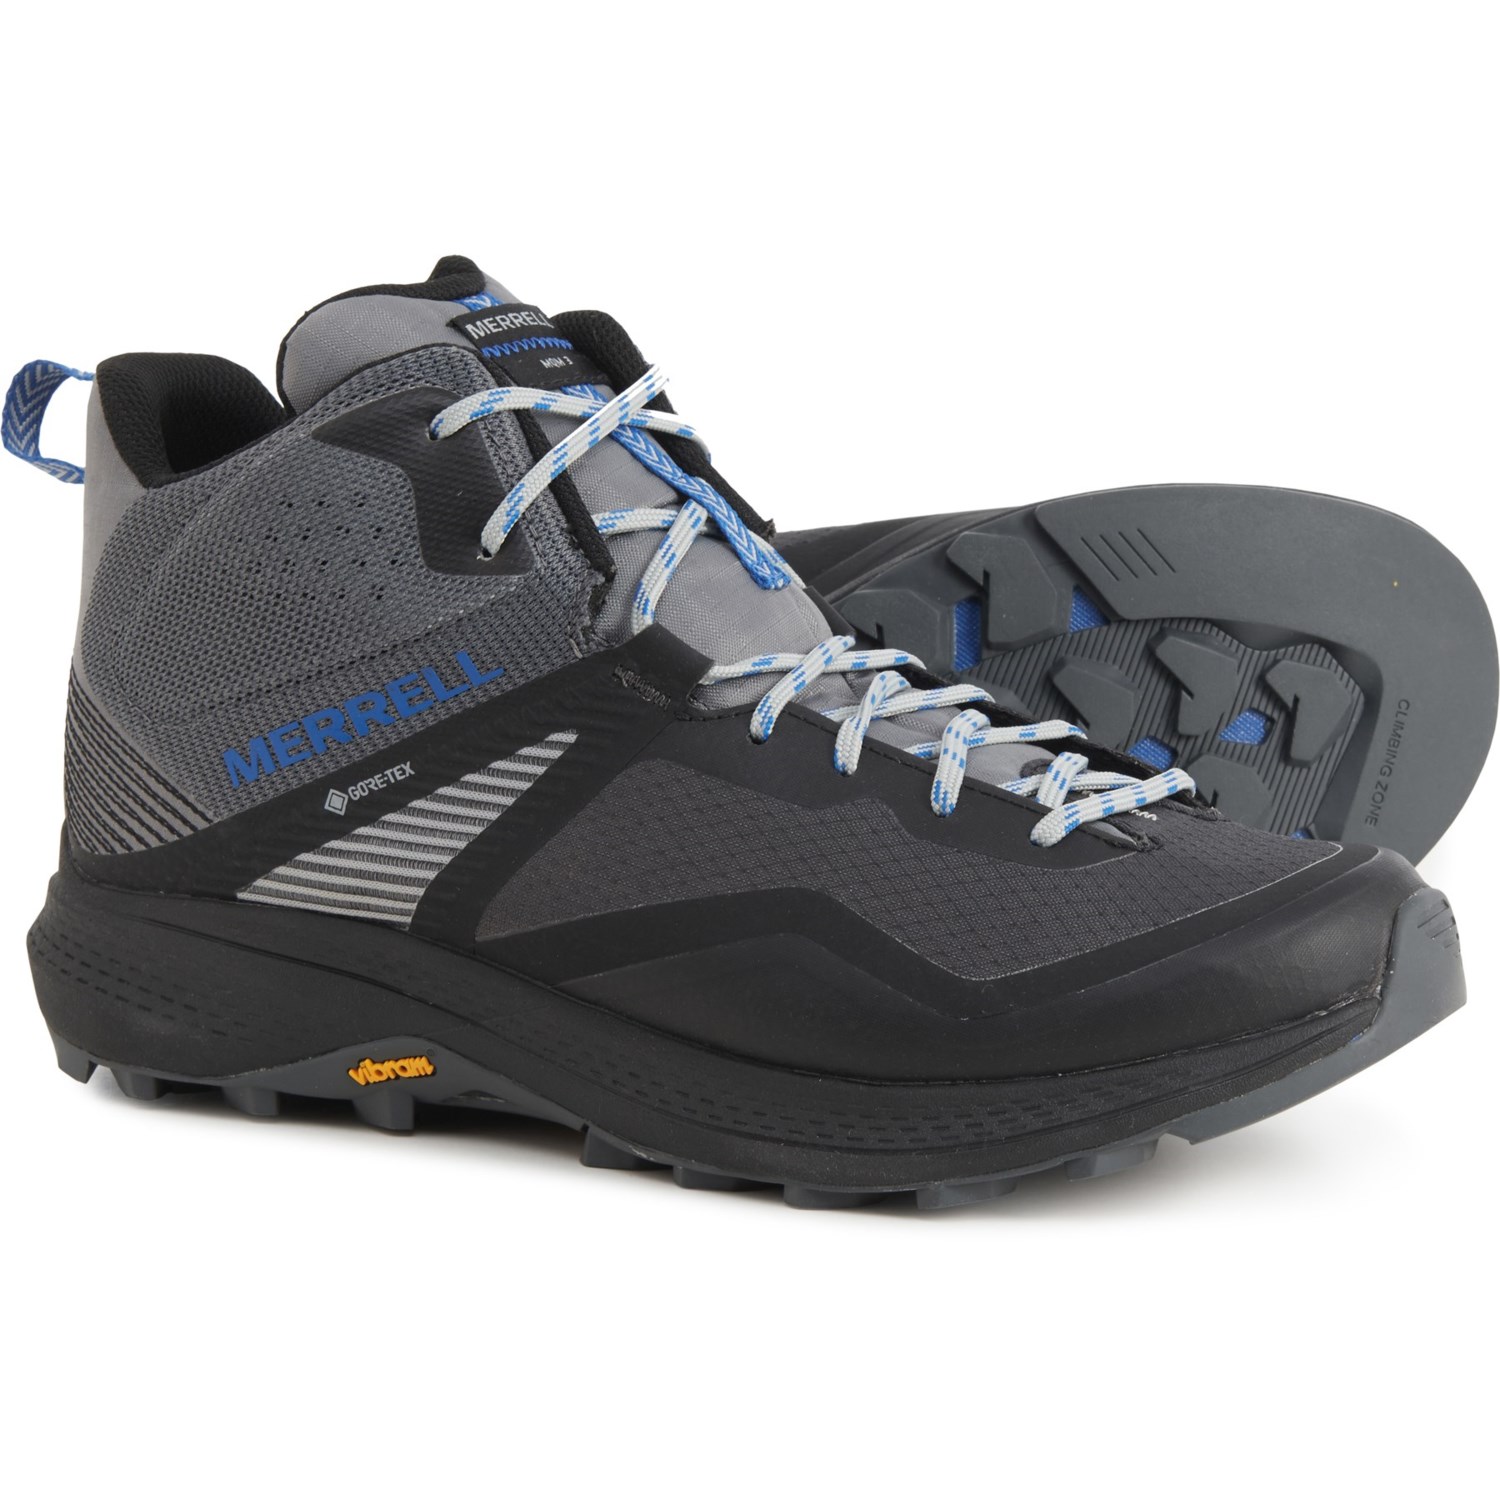 Merrell MQM 3 Gore-Tex® Mid Hiking Boots (For Men) - Save 50%